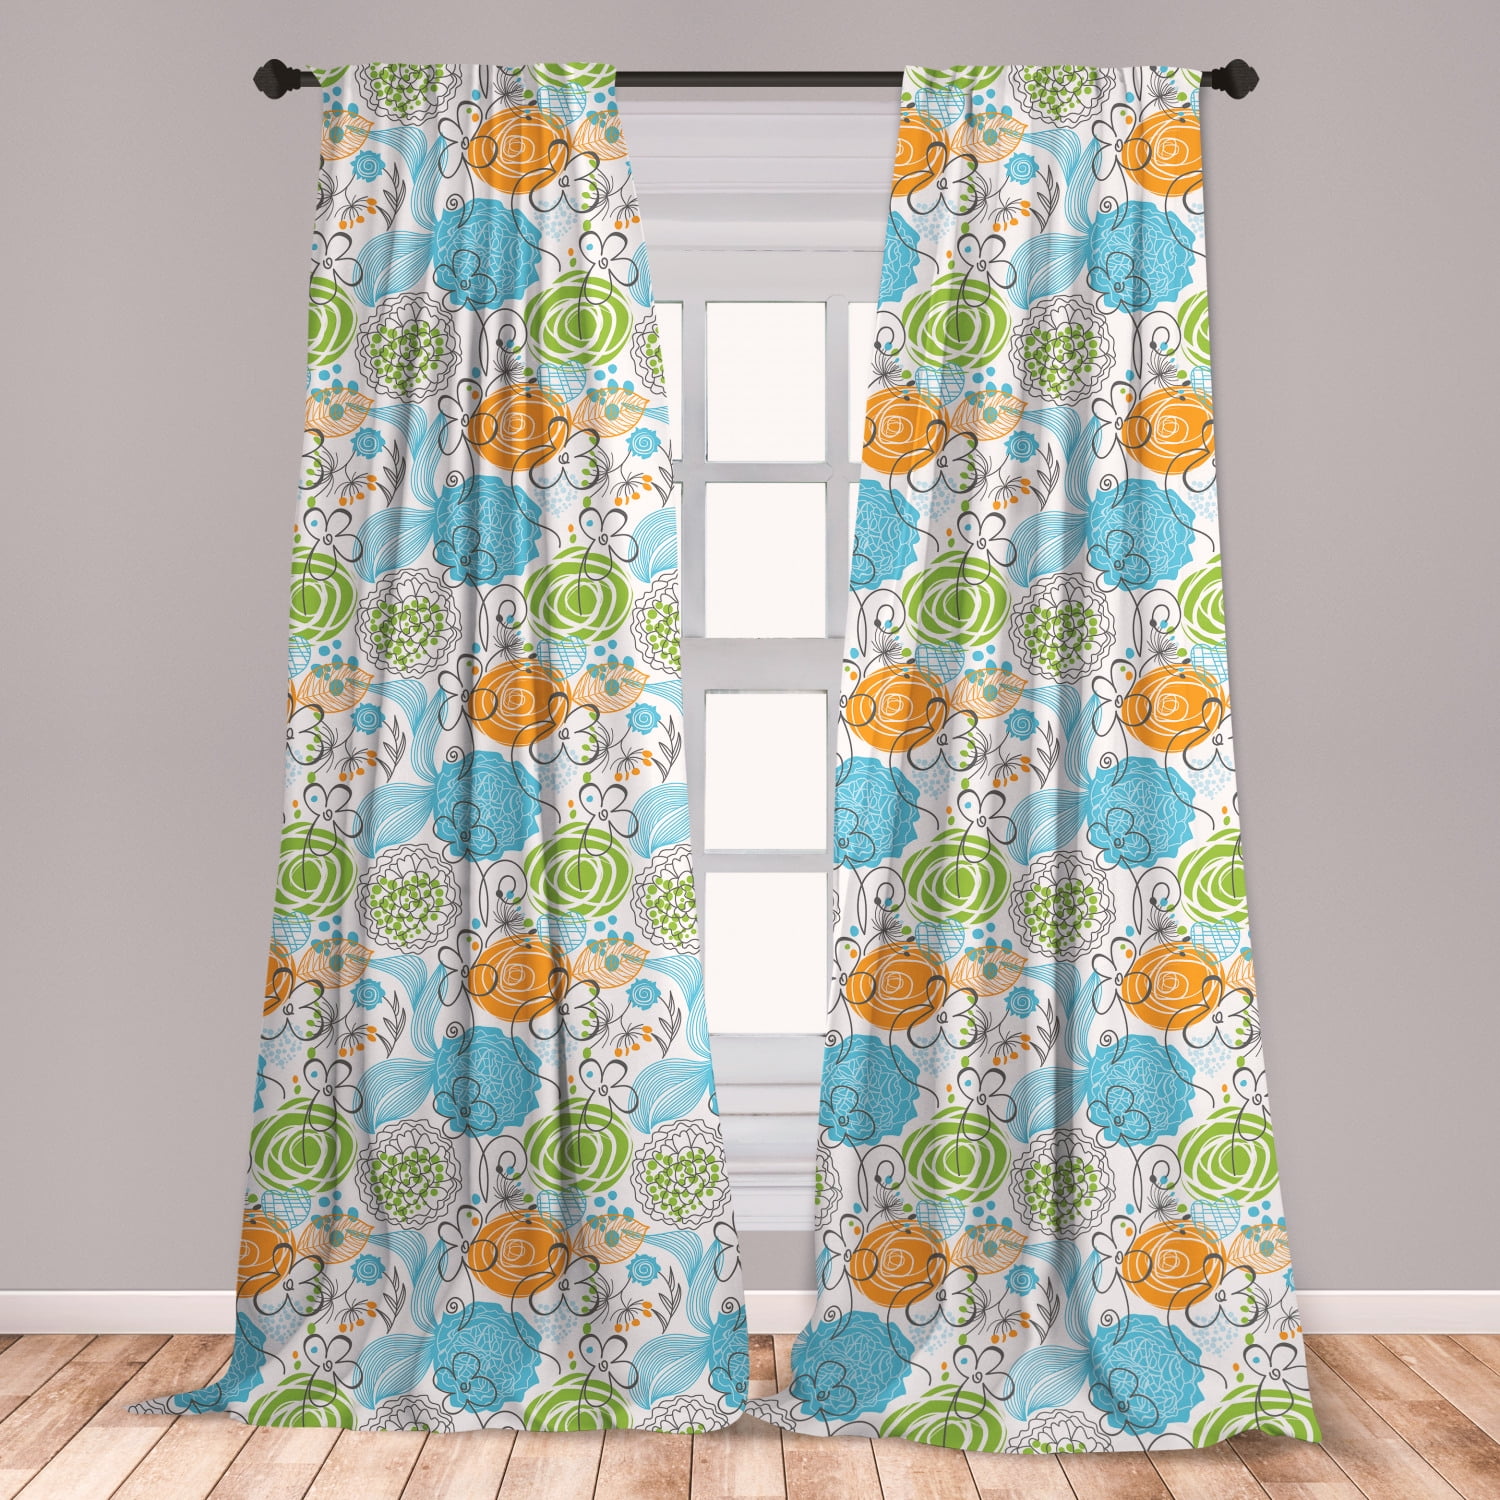 Floral Curtains 2 Panels Set Colorful Sketch Style Roses With